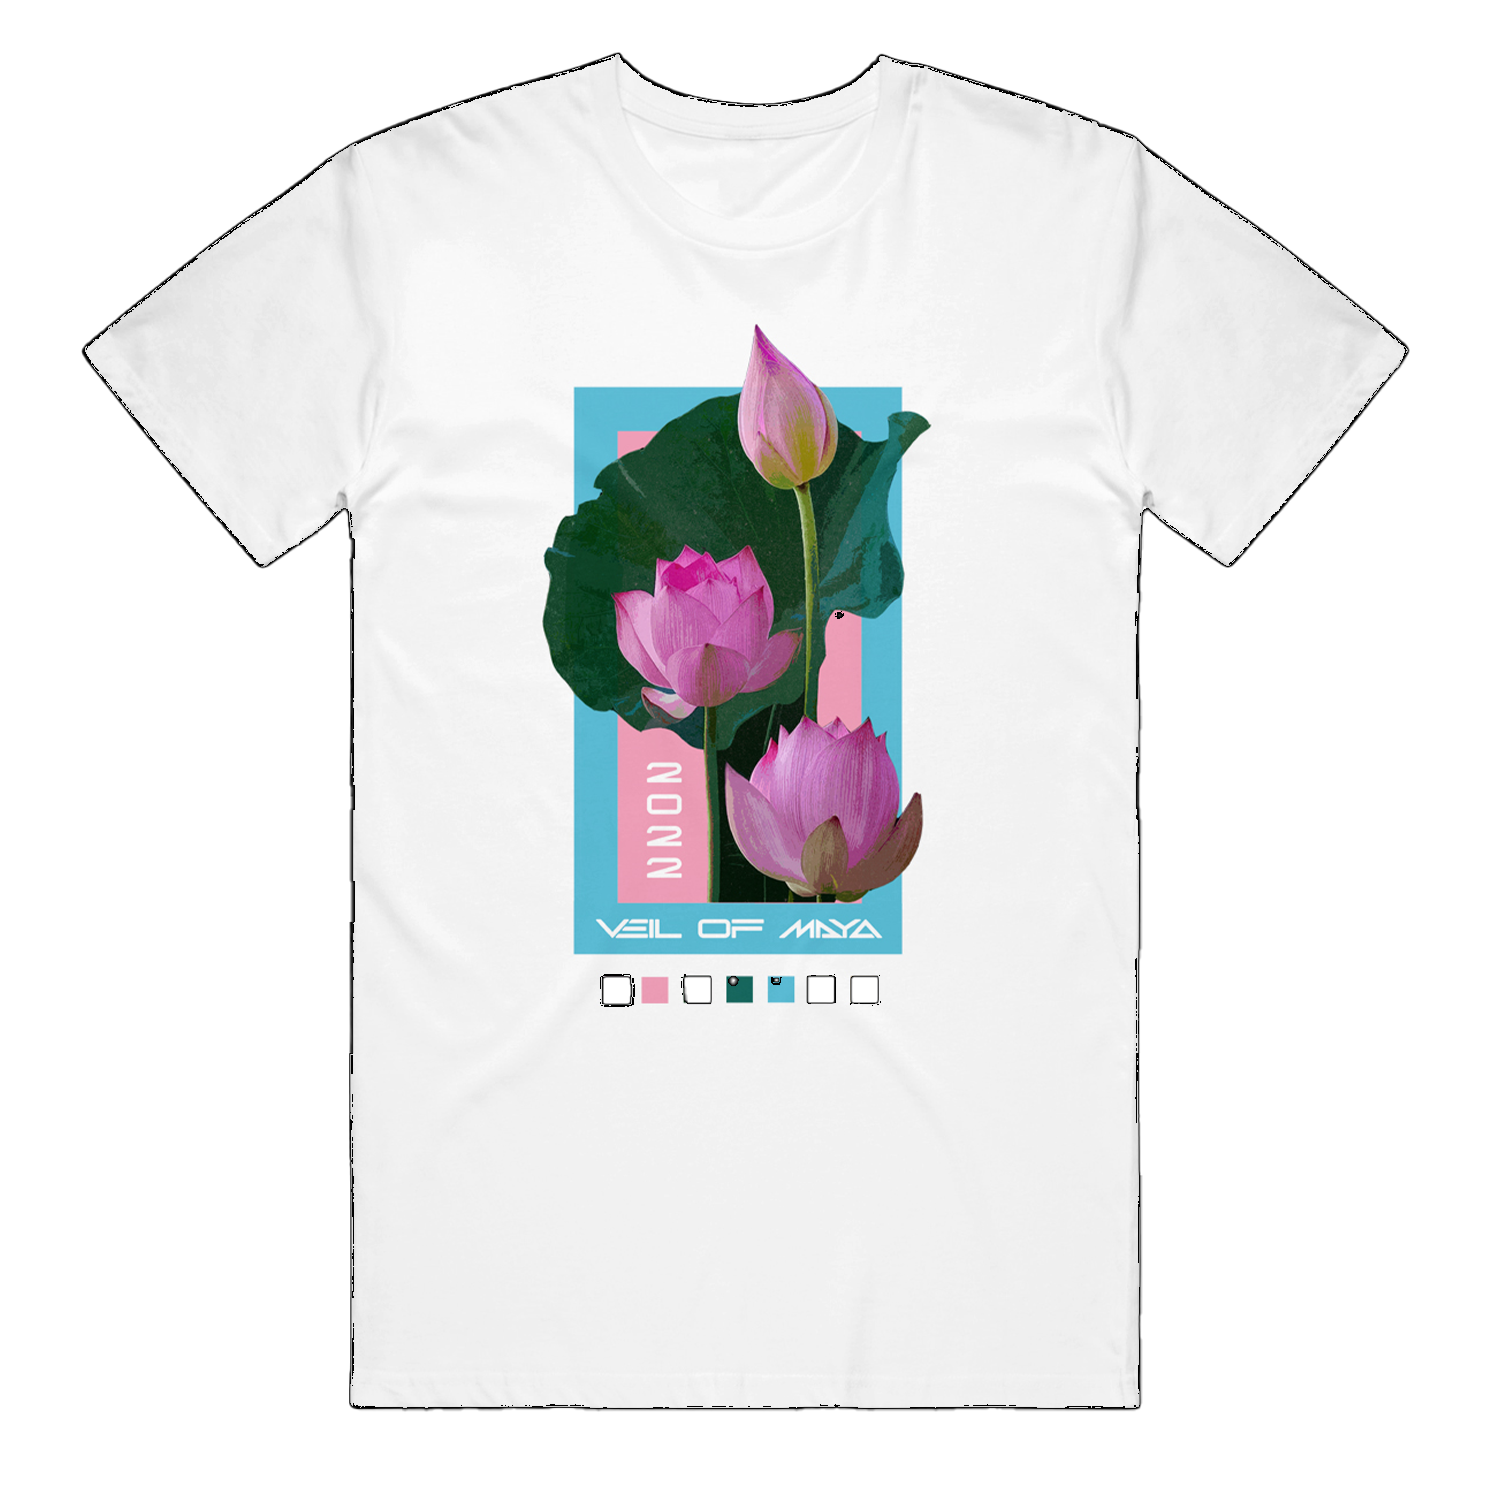 image of a white tee shirt on a transparent background. front of tee has colorful print of three flowers in front of a blue rectangle. across the bottom says veil of maya